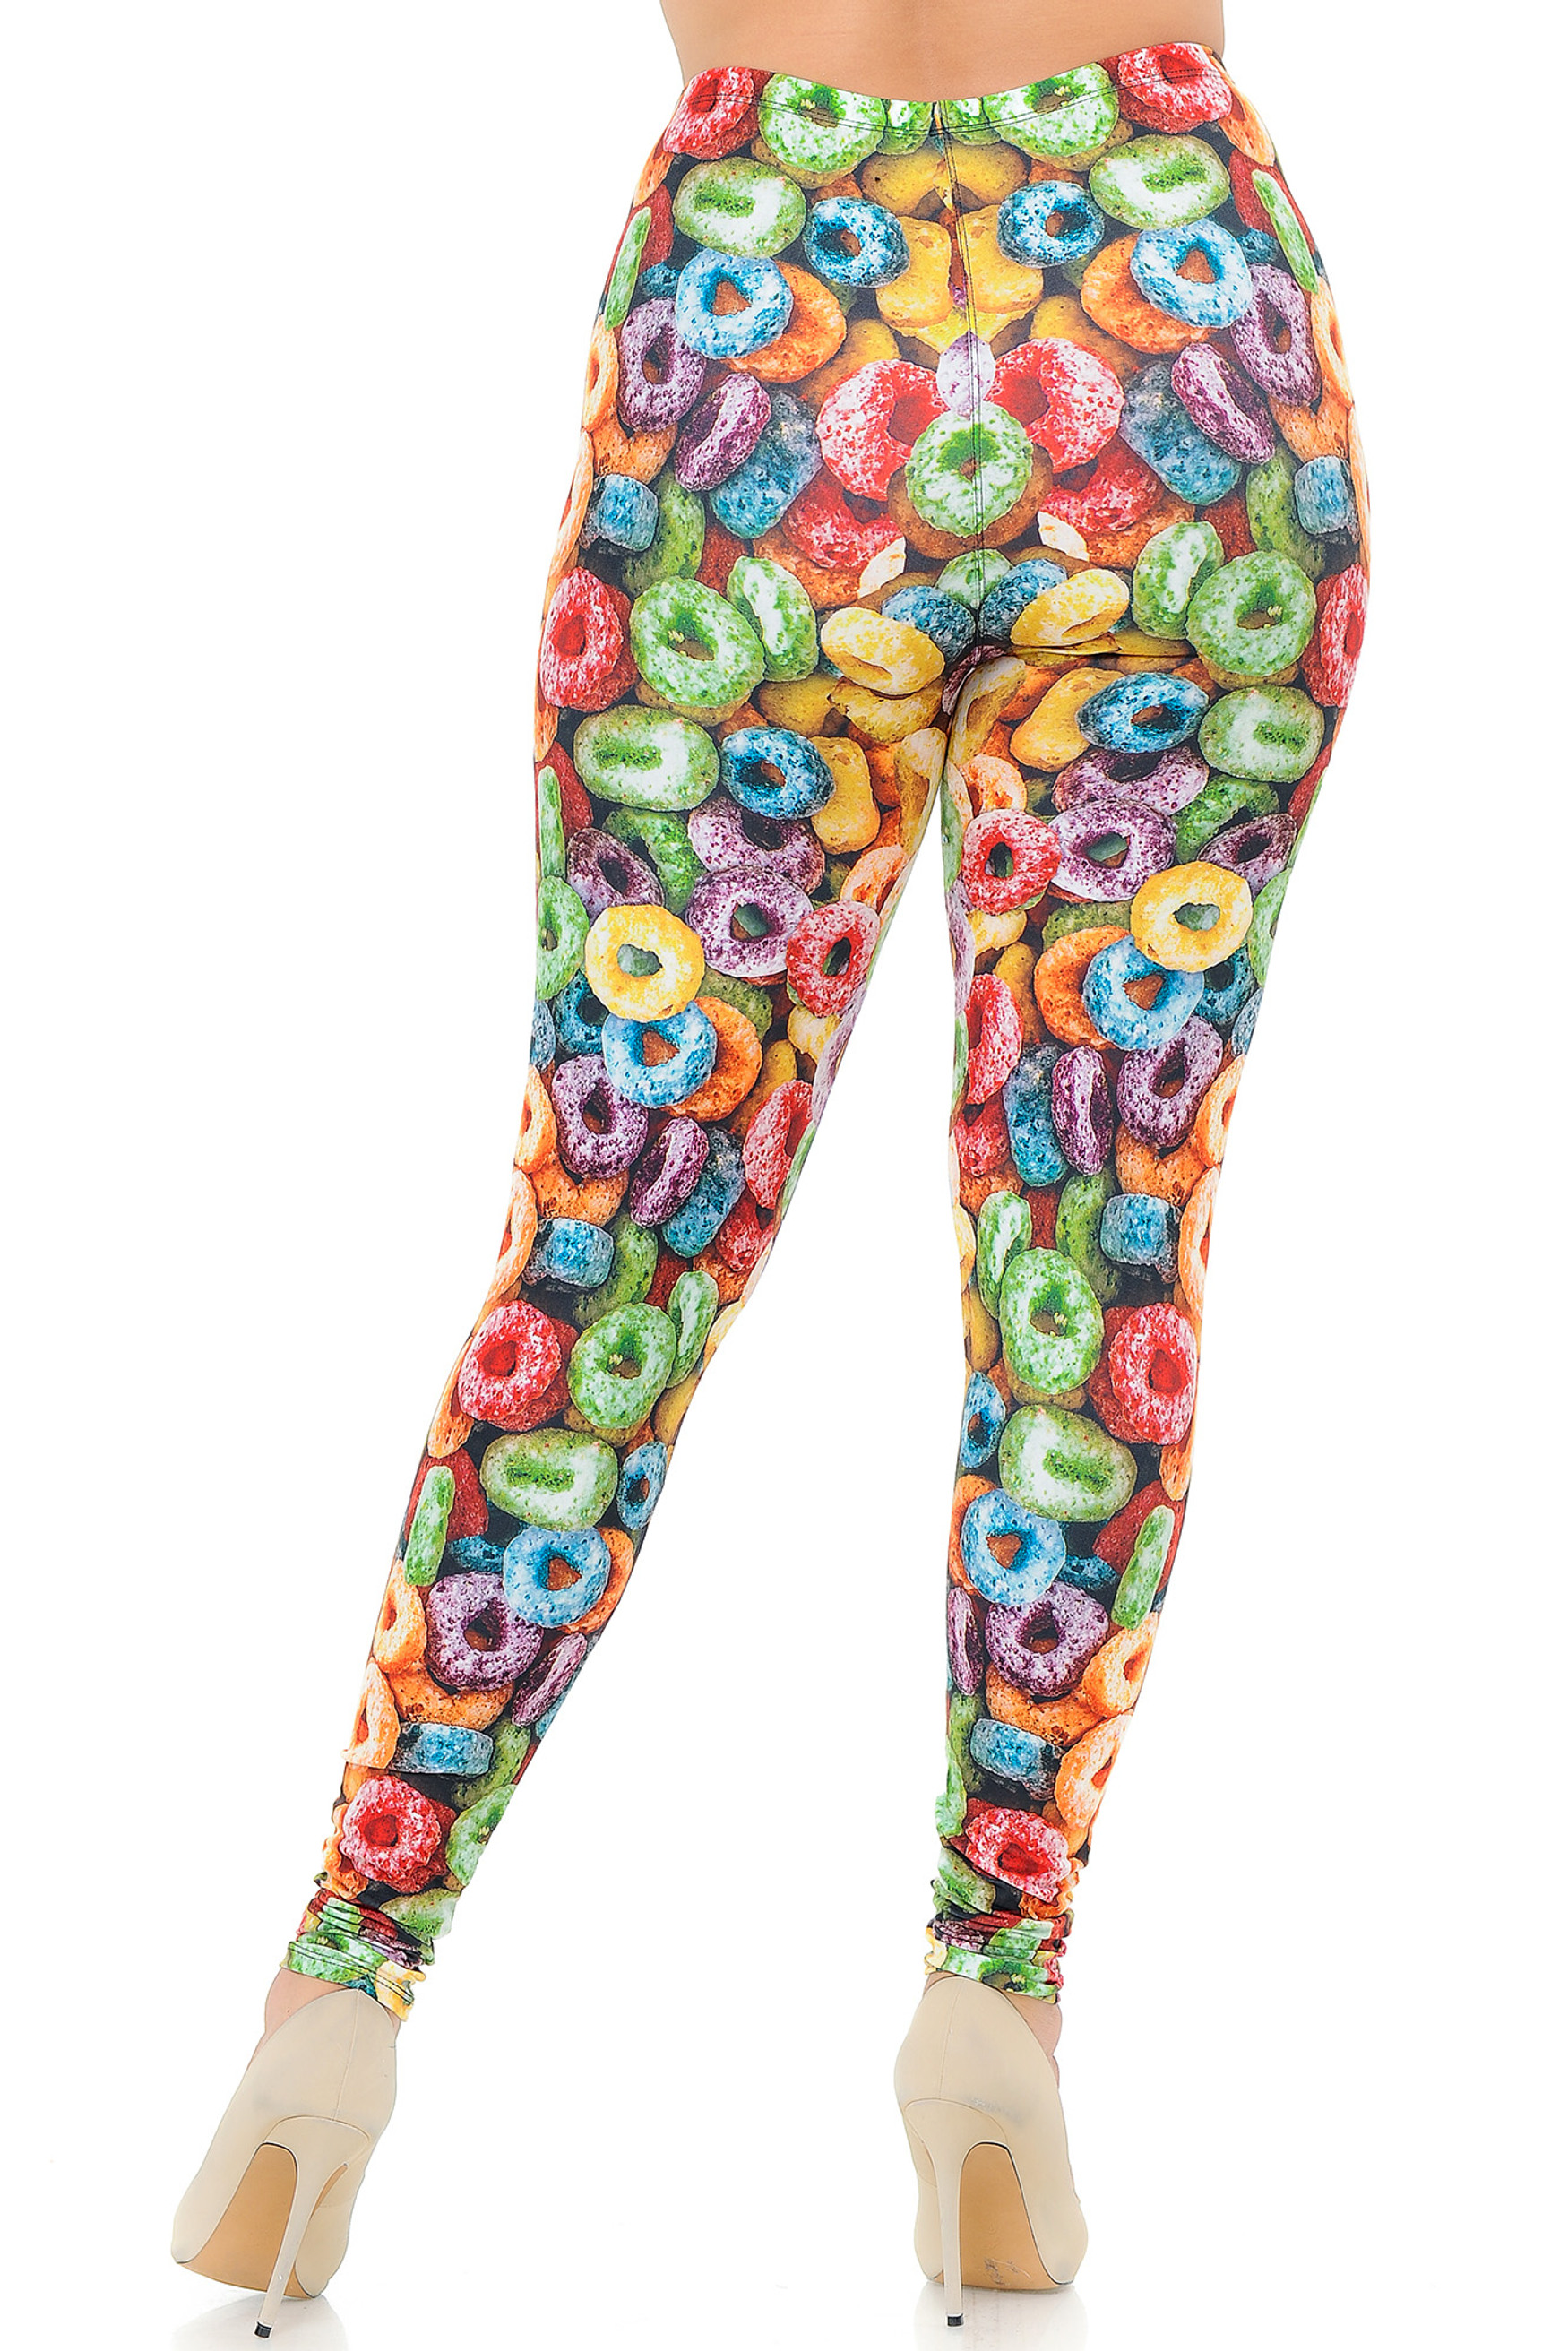 Creamy Soft Colorful Cereal Loops Extra Plus Size Leggings - 3X-5X - USA Fashion™